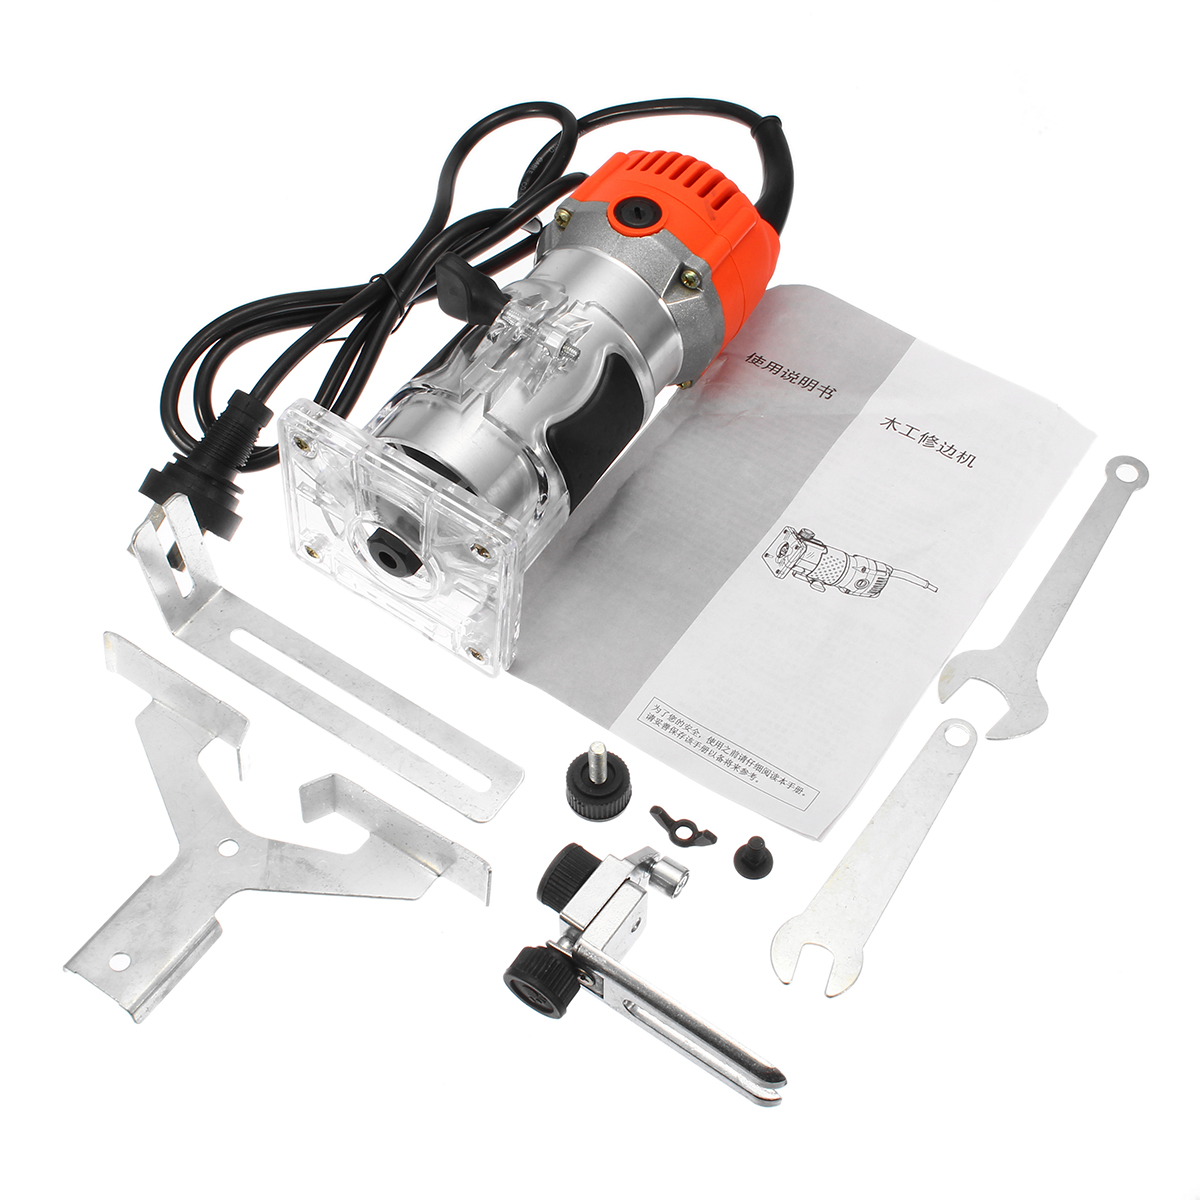 110V220V-1200W-635mm-Wood-Laminate-Palm-Router-Electric-Hand-Trimmer-Edge-Joiners-Woodworking-Tool-1539226-11